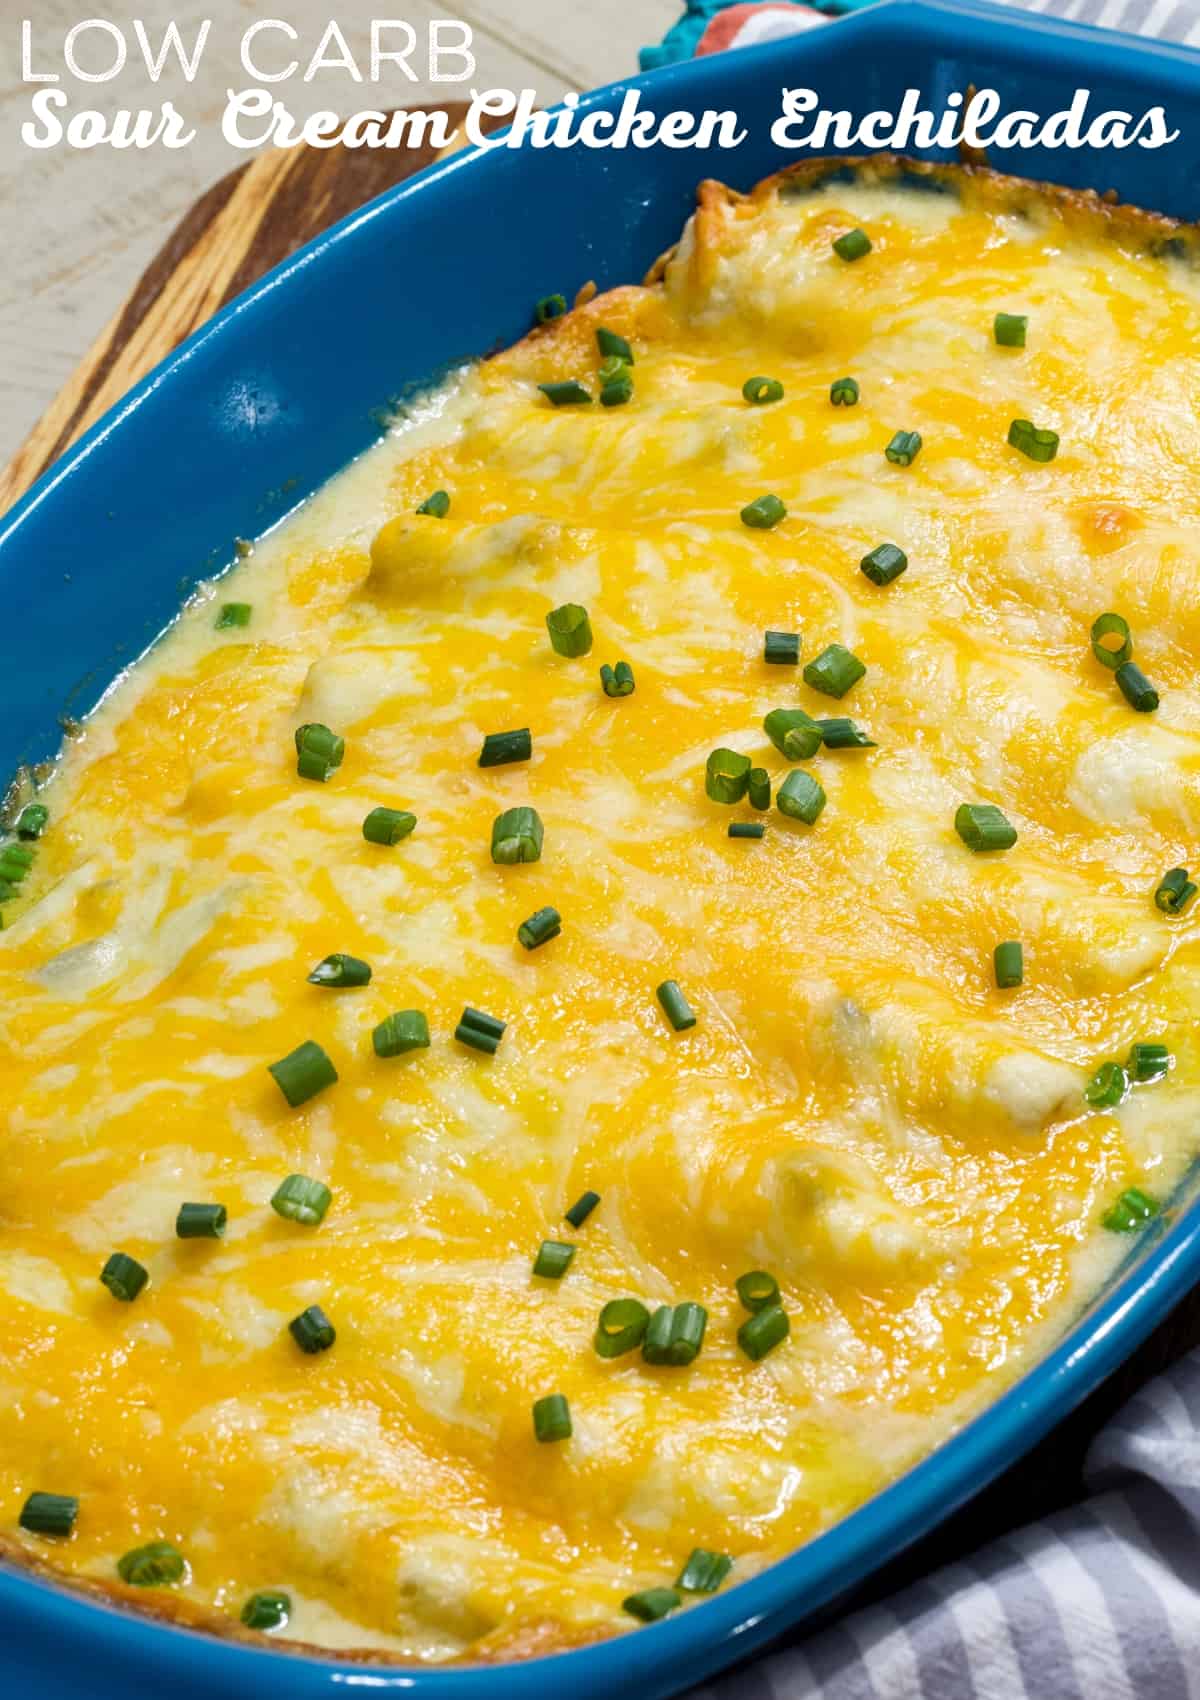 A blue casserole dish filled with sour cream chicken enchiladas topped with green onions.